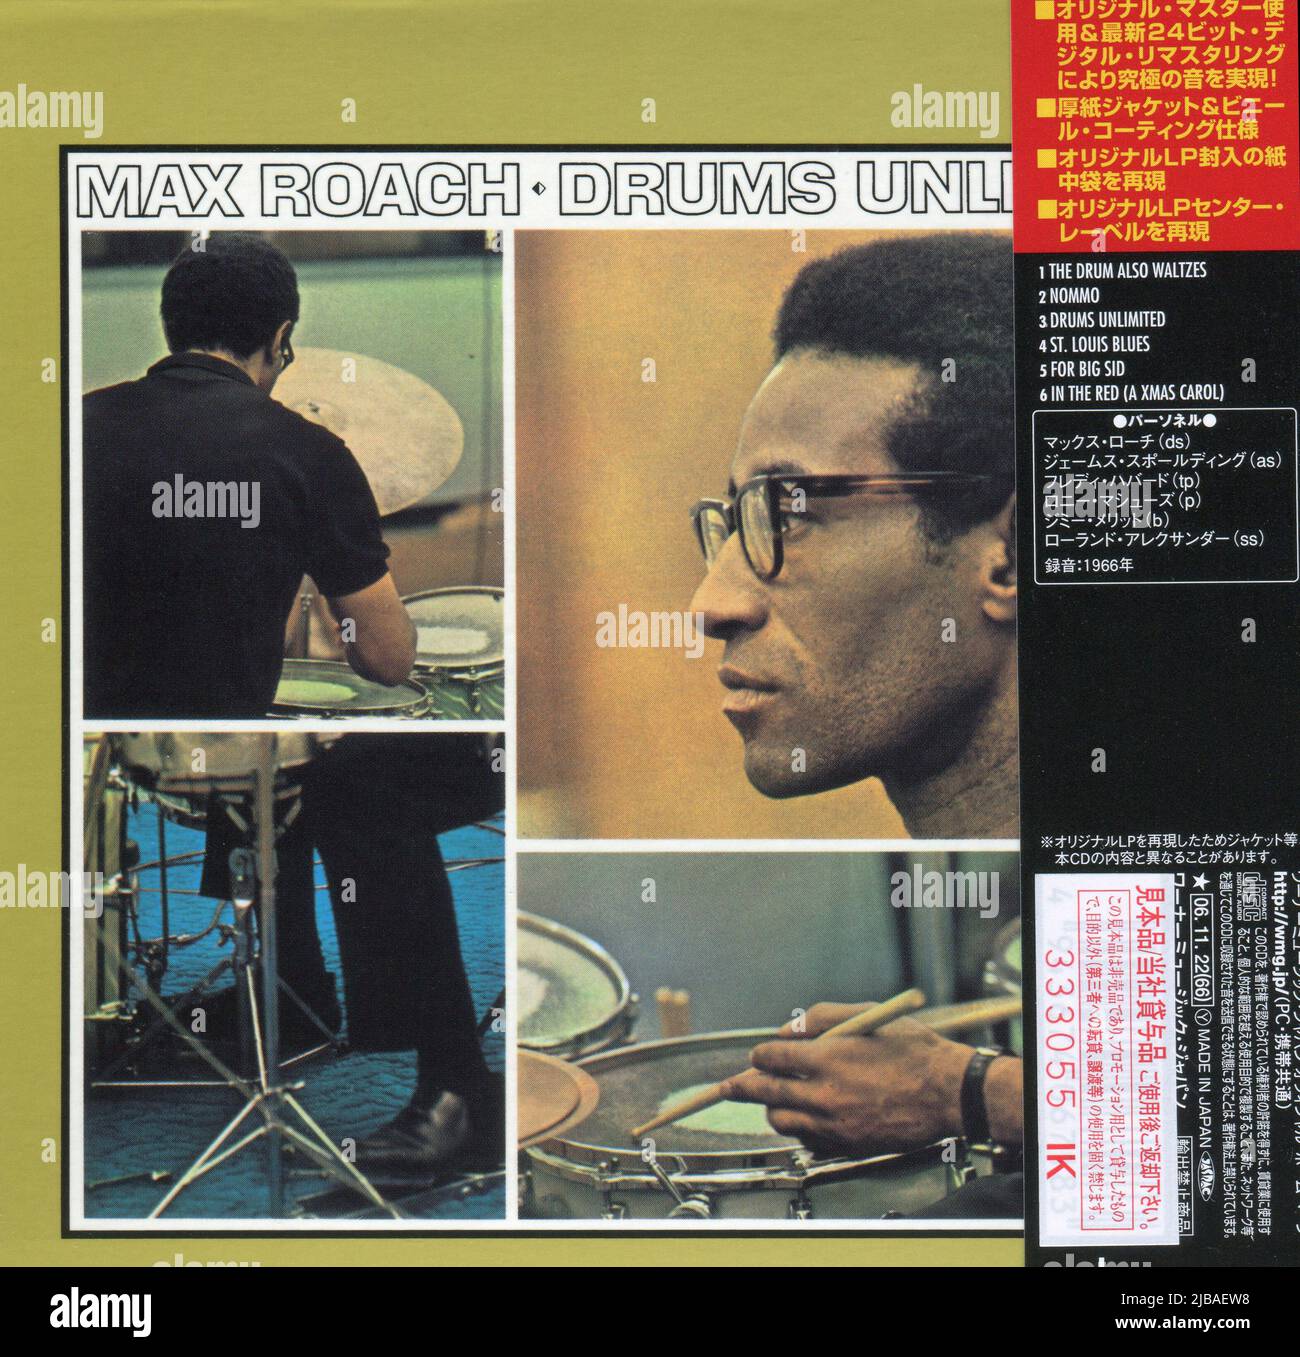 CD: Max Roach DRUMS UNLIMITED (WPCR-25113) Promo, Released: 22